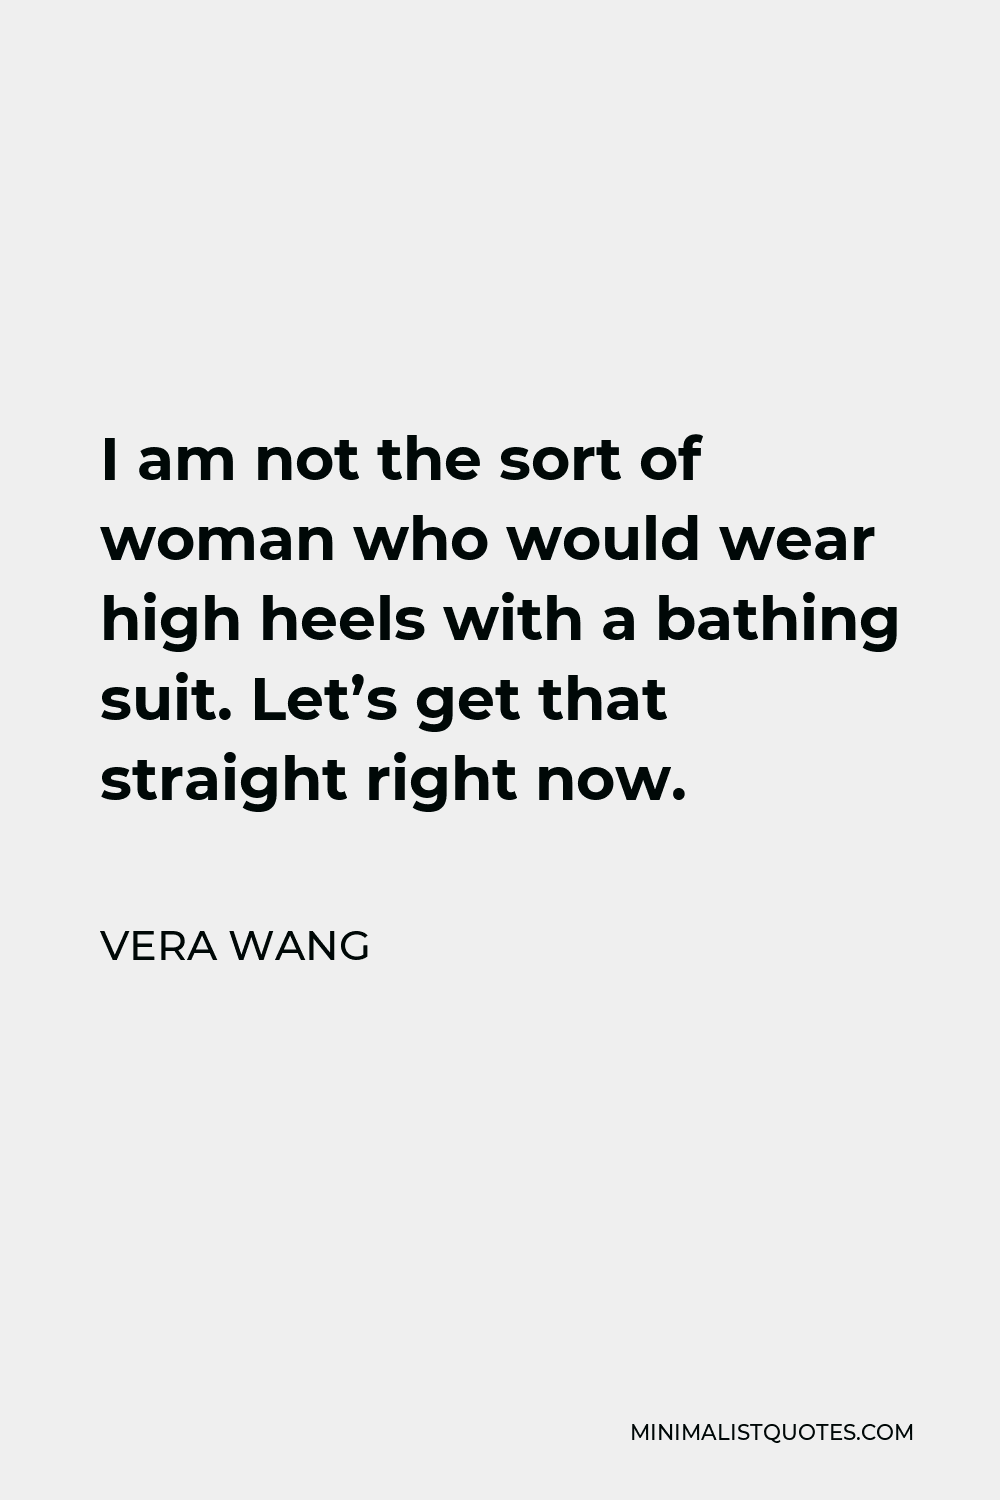 Vera Wang Quote - I am not the sort of woman who would wear high heels with a bathing suit. Let’s get that straight right now.